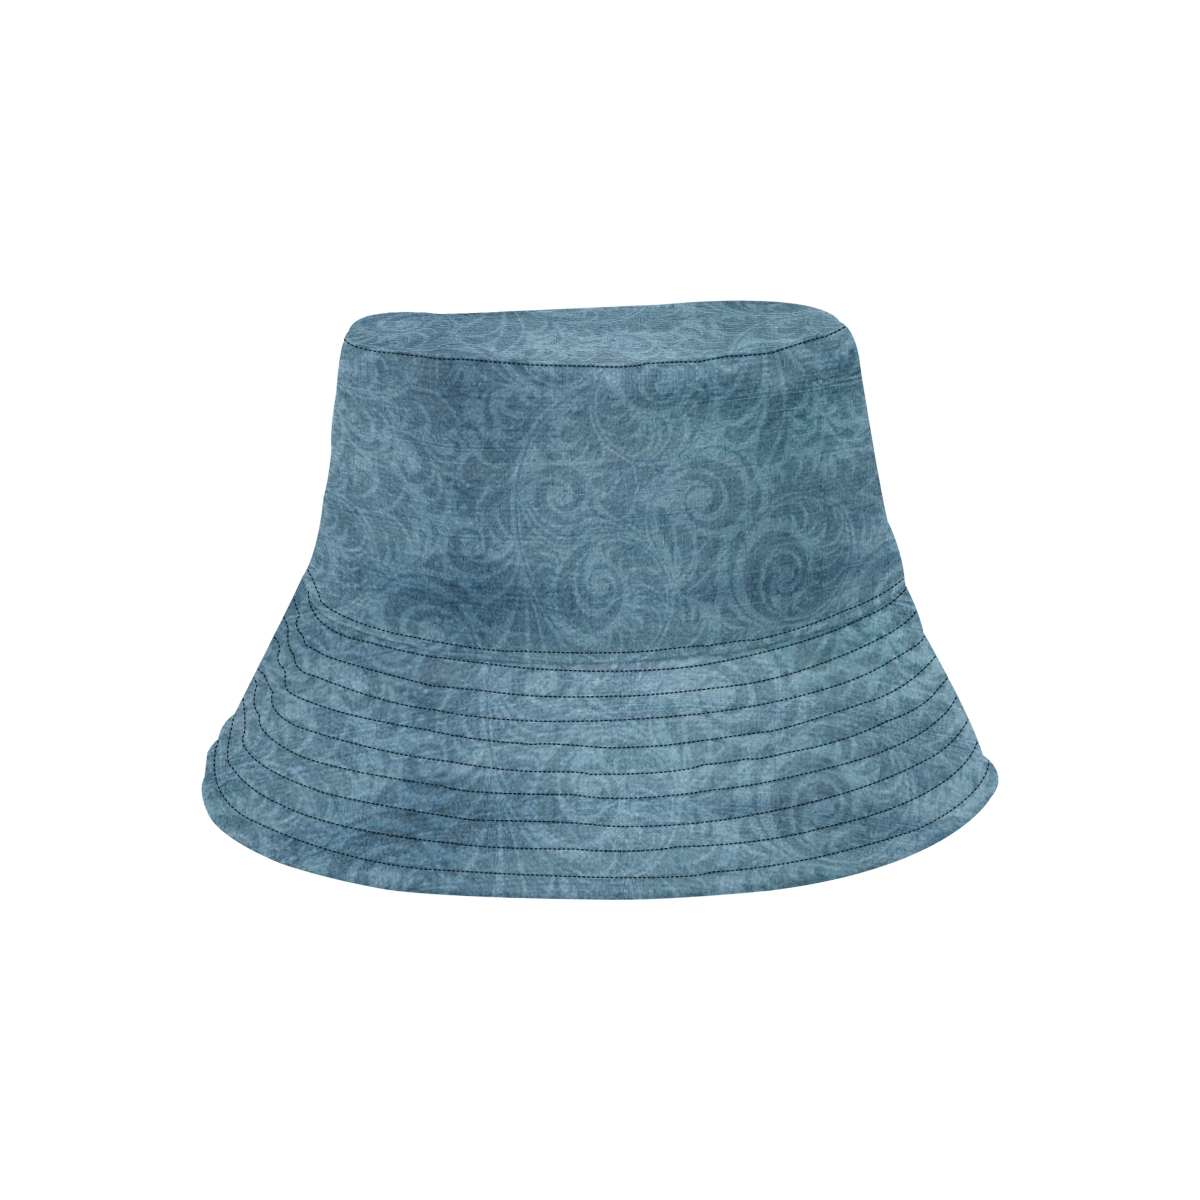 Denim with vintage floral pattern, turquoise blue All Over Print Bucket Hat